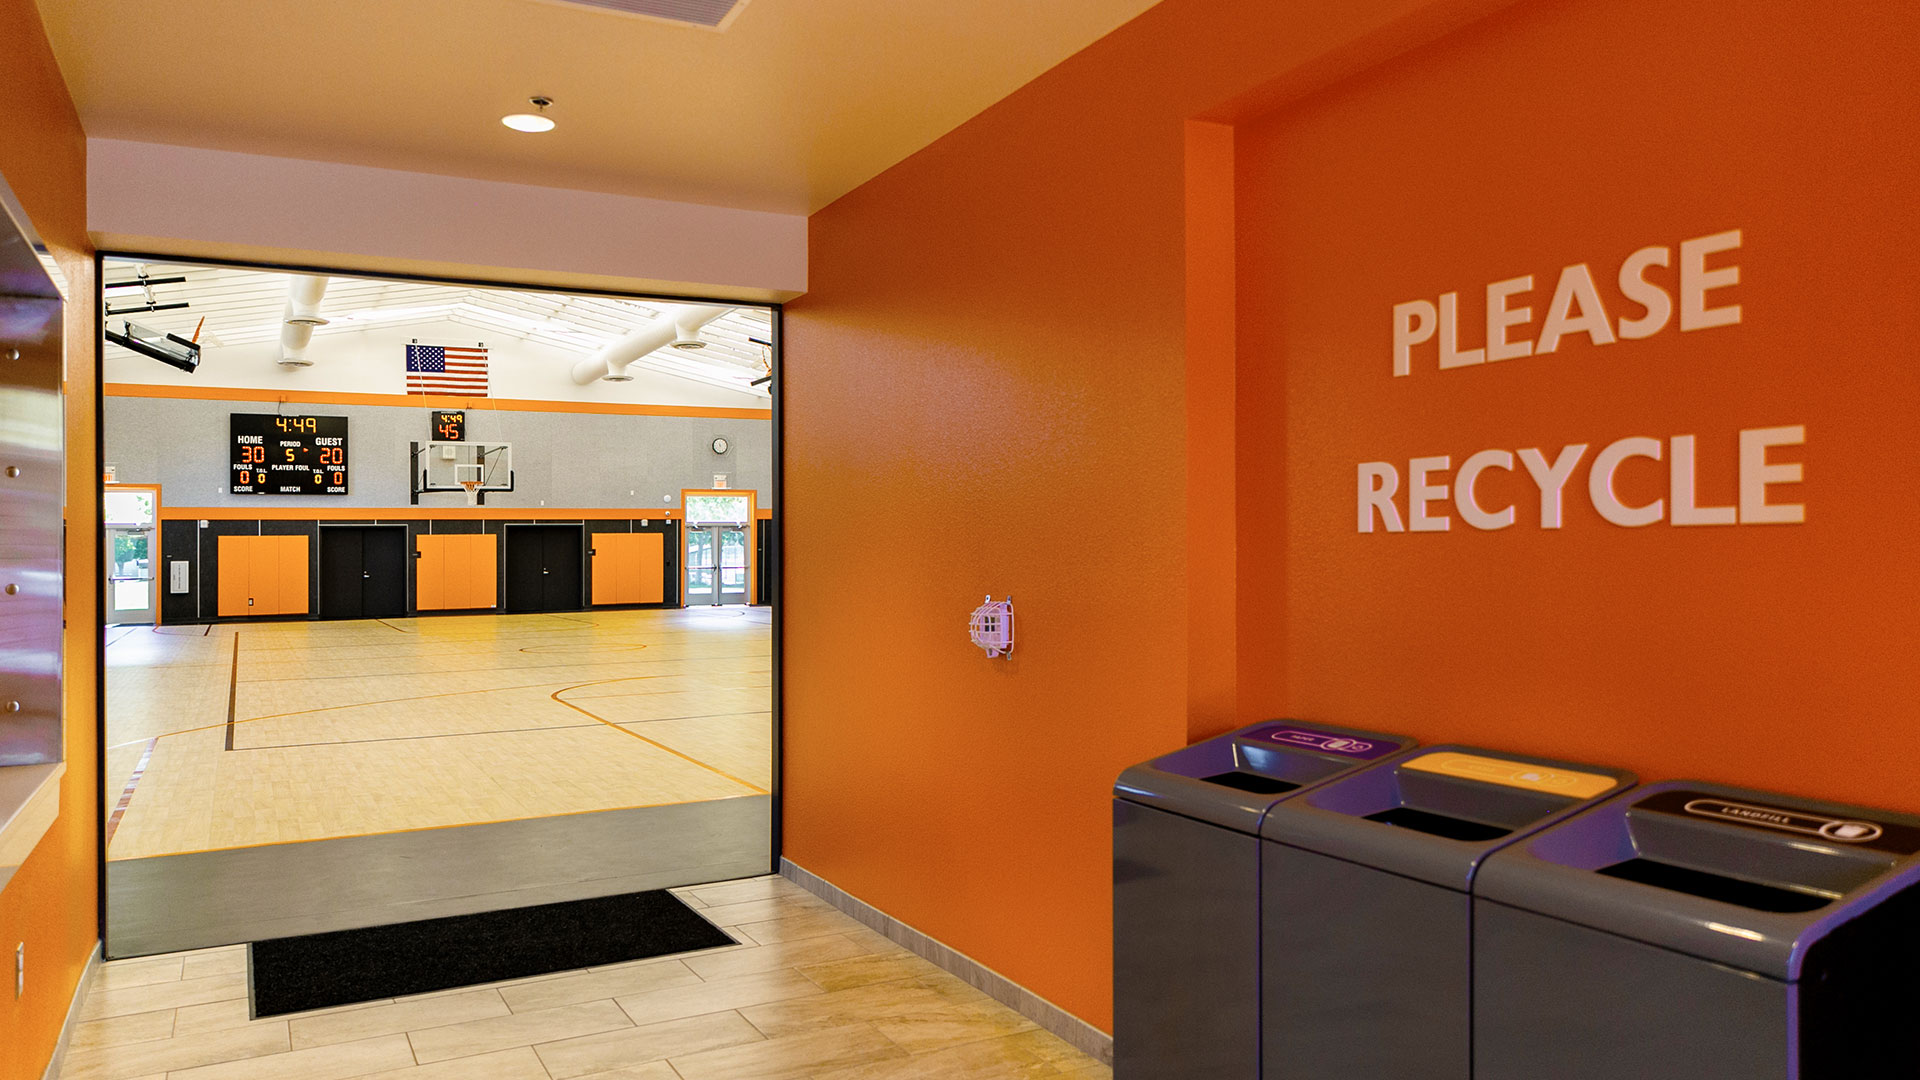 Interior of hallway between foyer and gym, with orange walls and a recycle and trash hub.